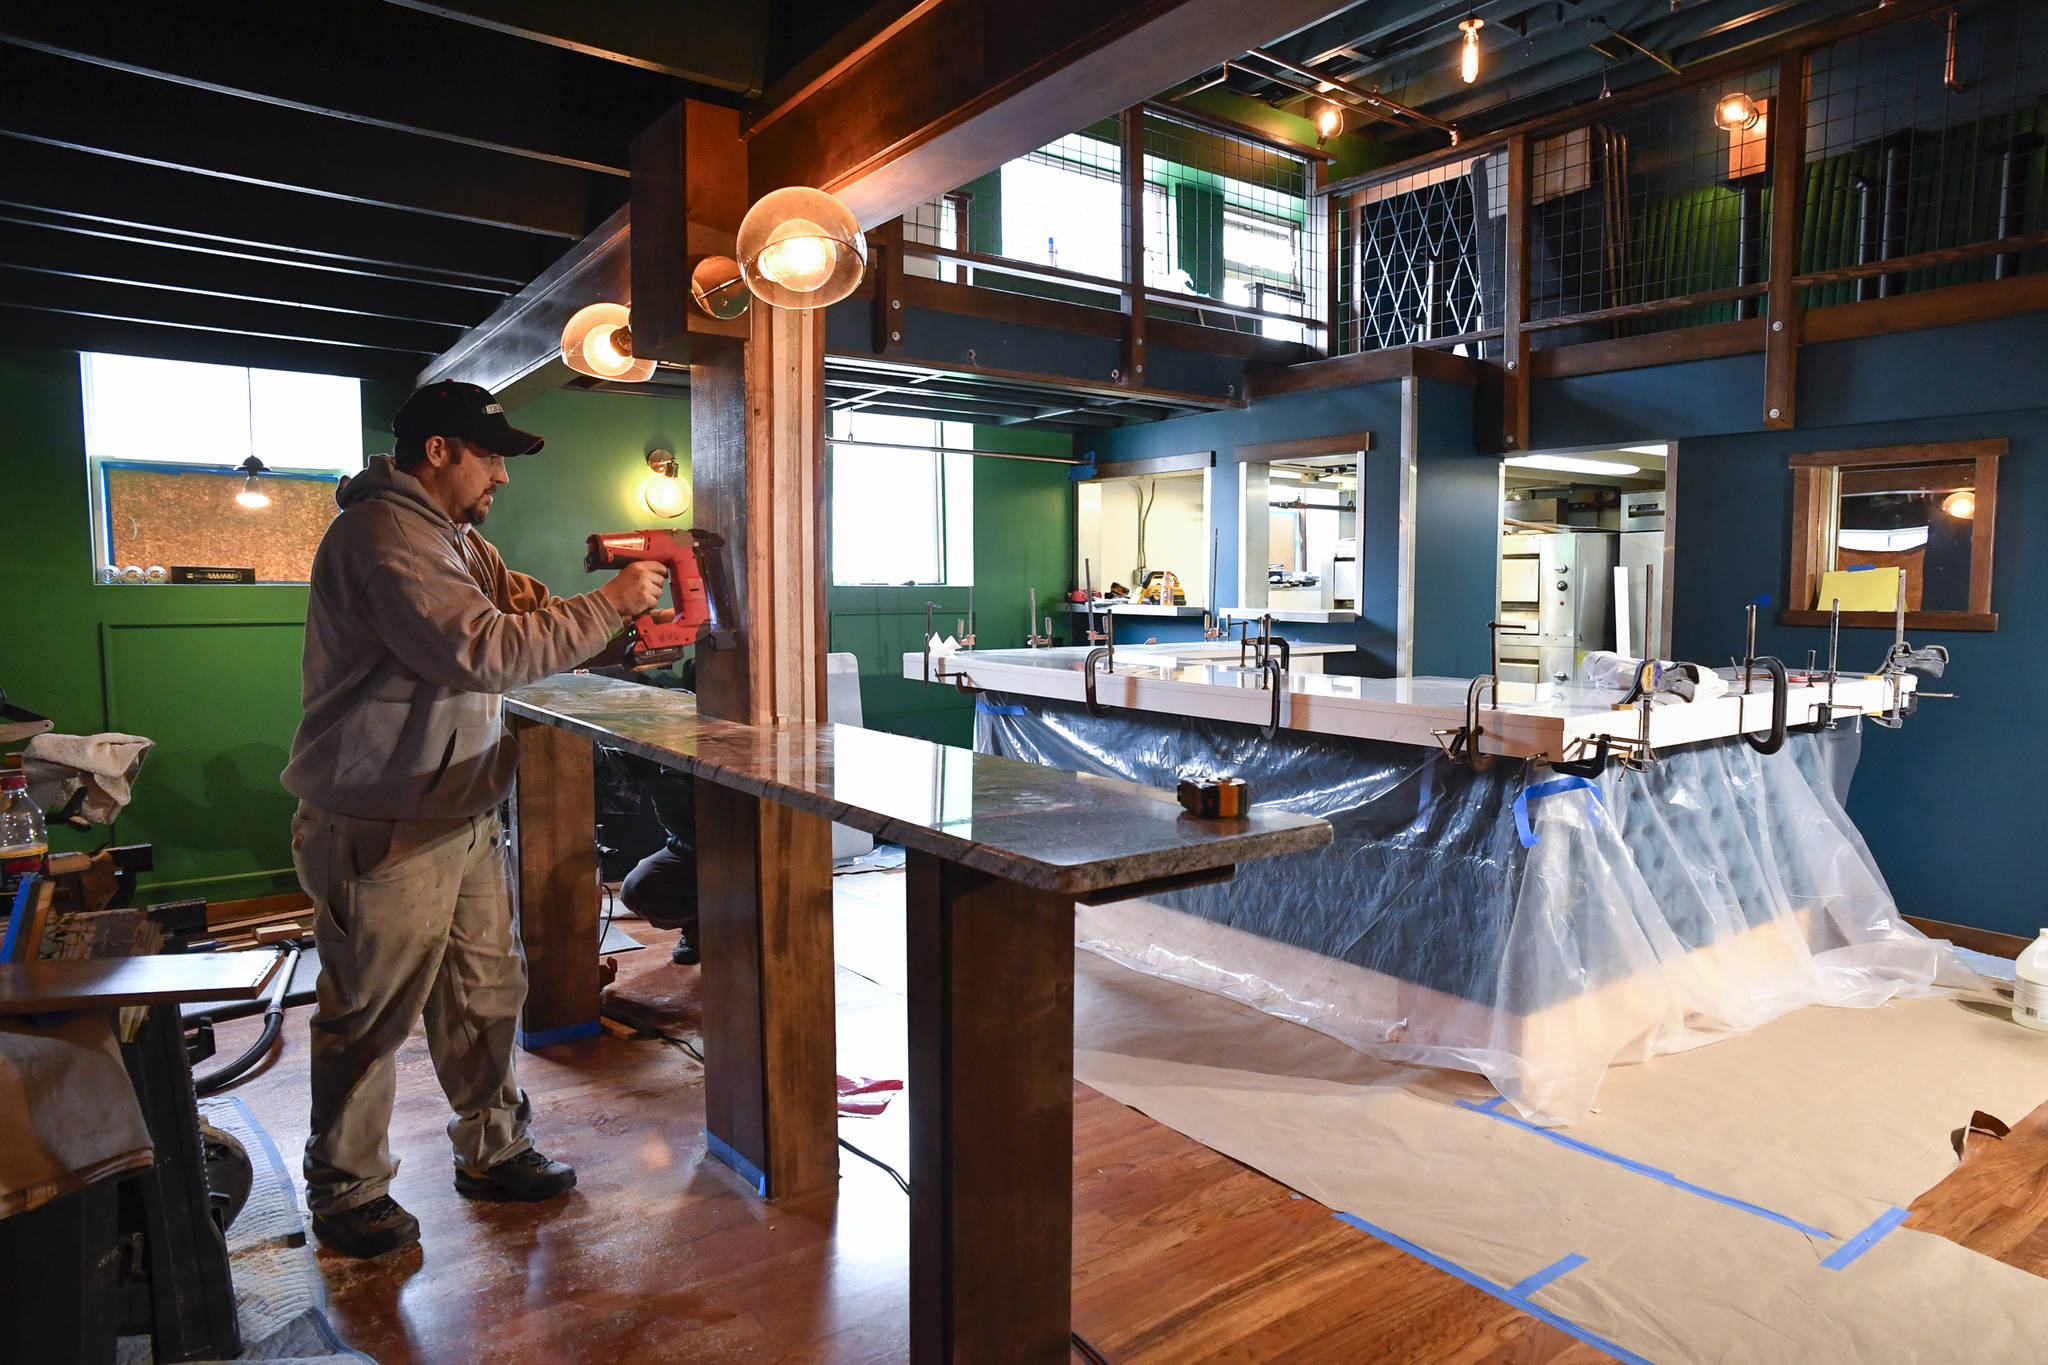 Matt Herrick works on the remodel of Roma (formerly known as Pizzeria Roma) on Friday, April 5, 2019. The restaurant is scheduled to reopen on April 15. (Michael Penn | Juneau Empire)